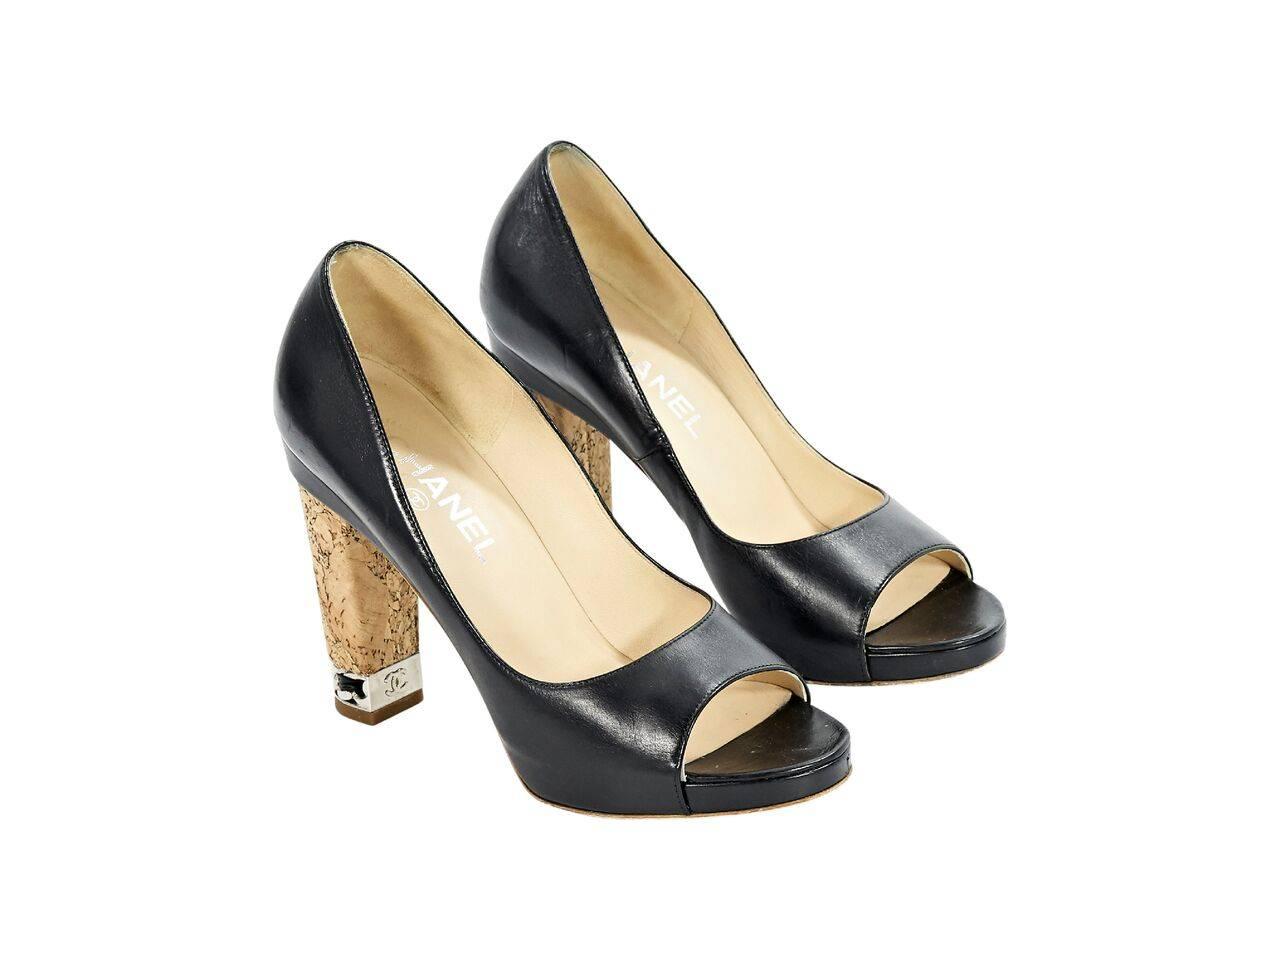 Product details:  Black leather pumps by Chanel.  Open toe.  Cork heel with chain accents.  Slip-on style.  Silvertone hardware.  
Condition: Pre-owned. Very good.
Est. Retail $ 1,100.00